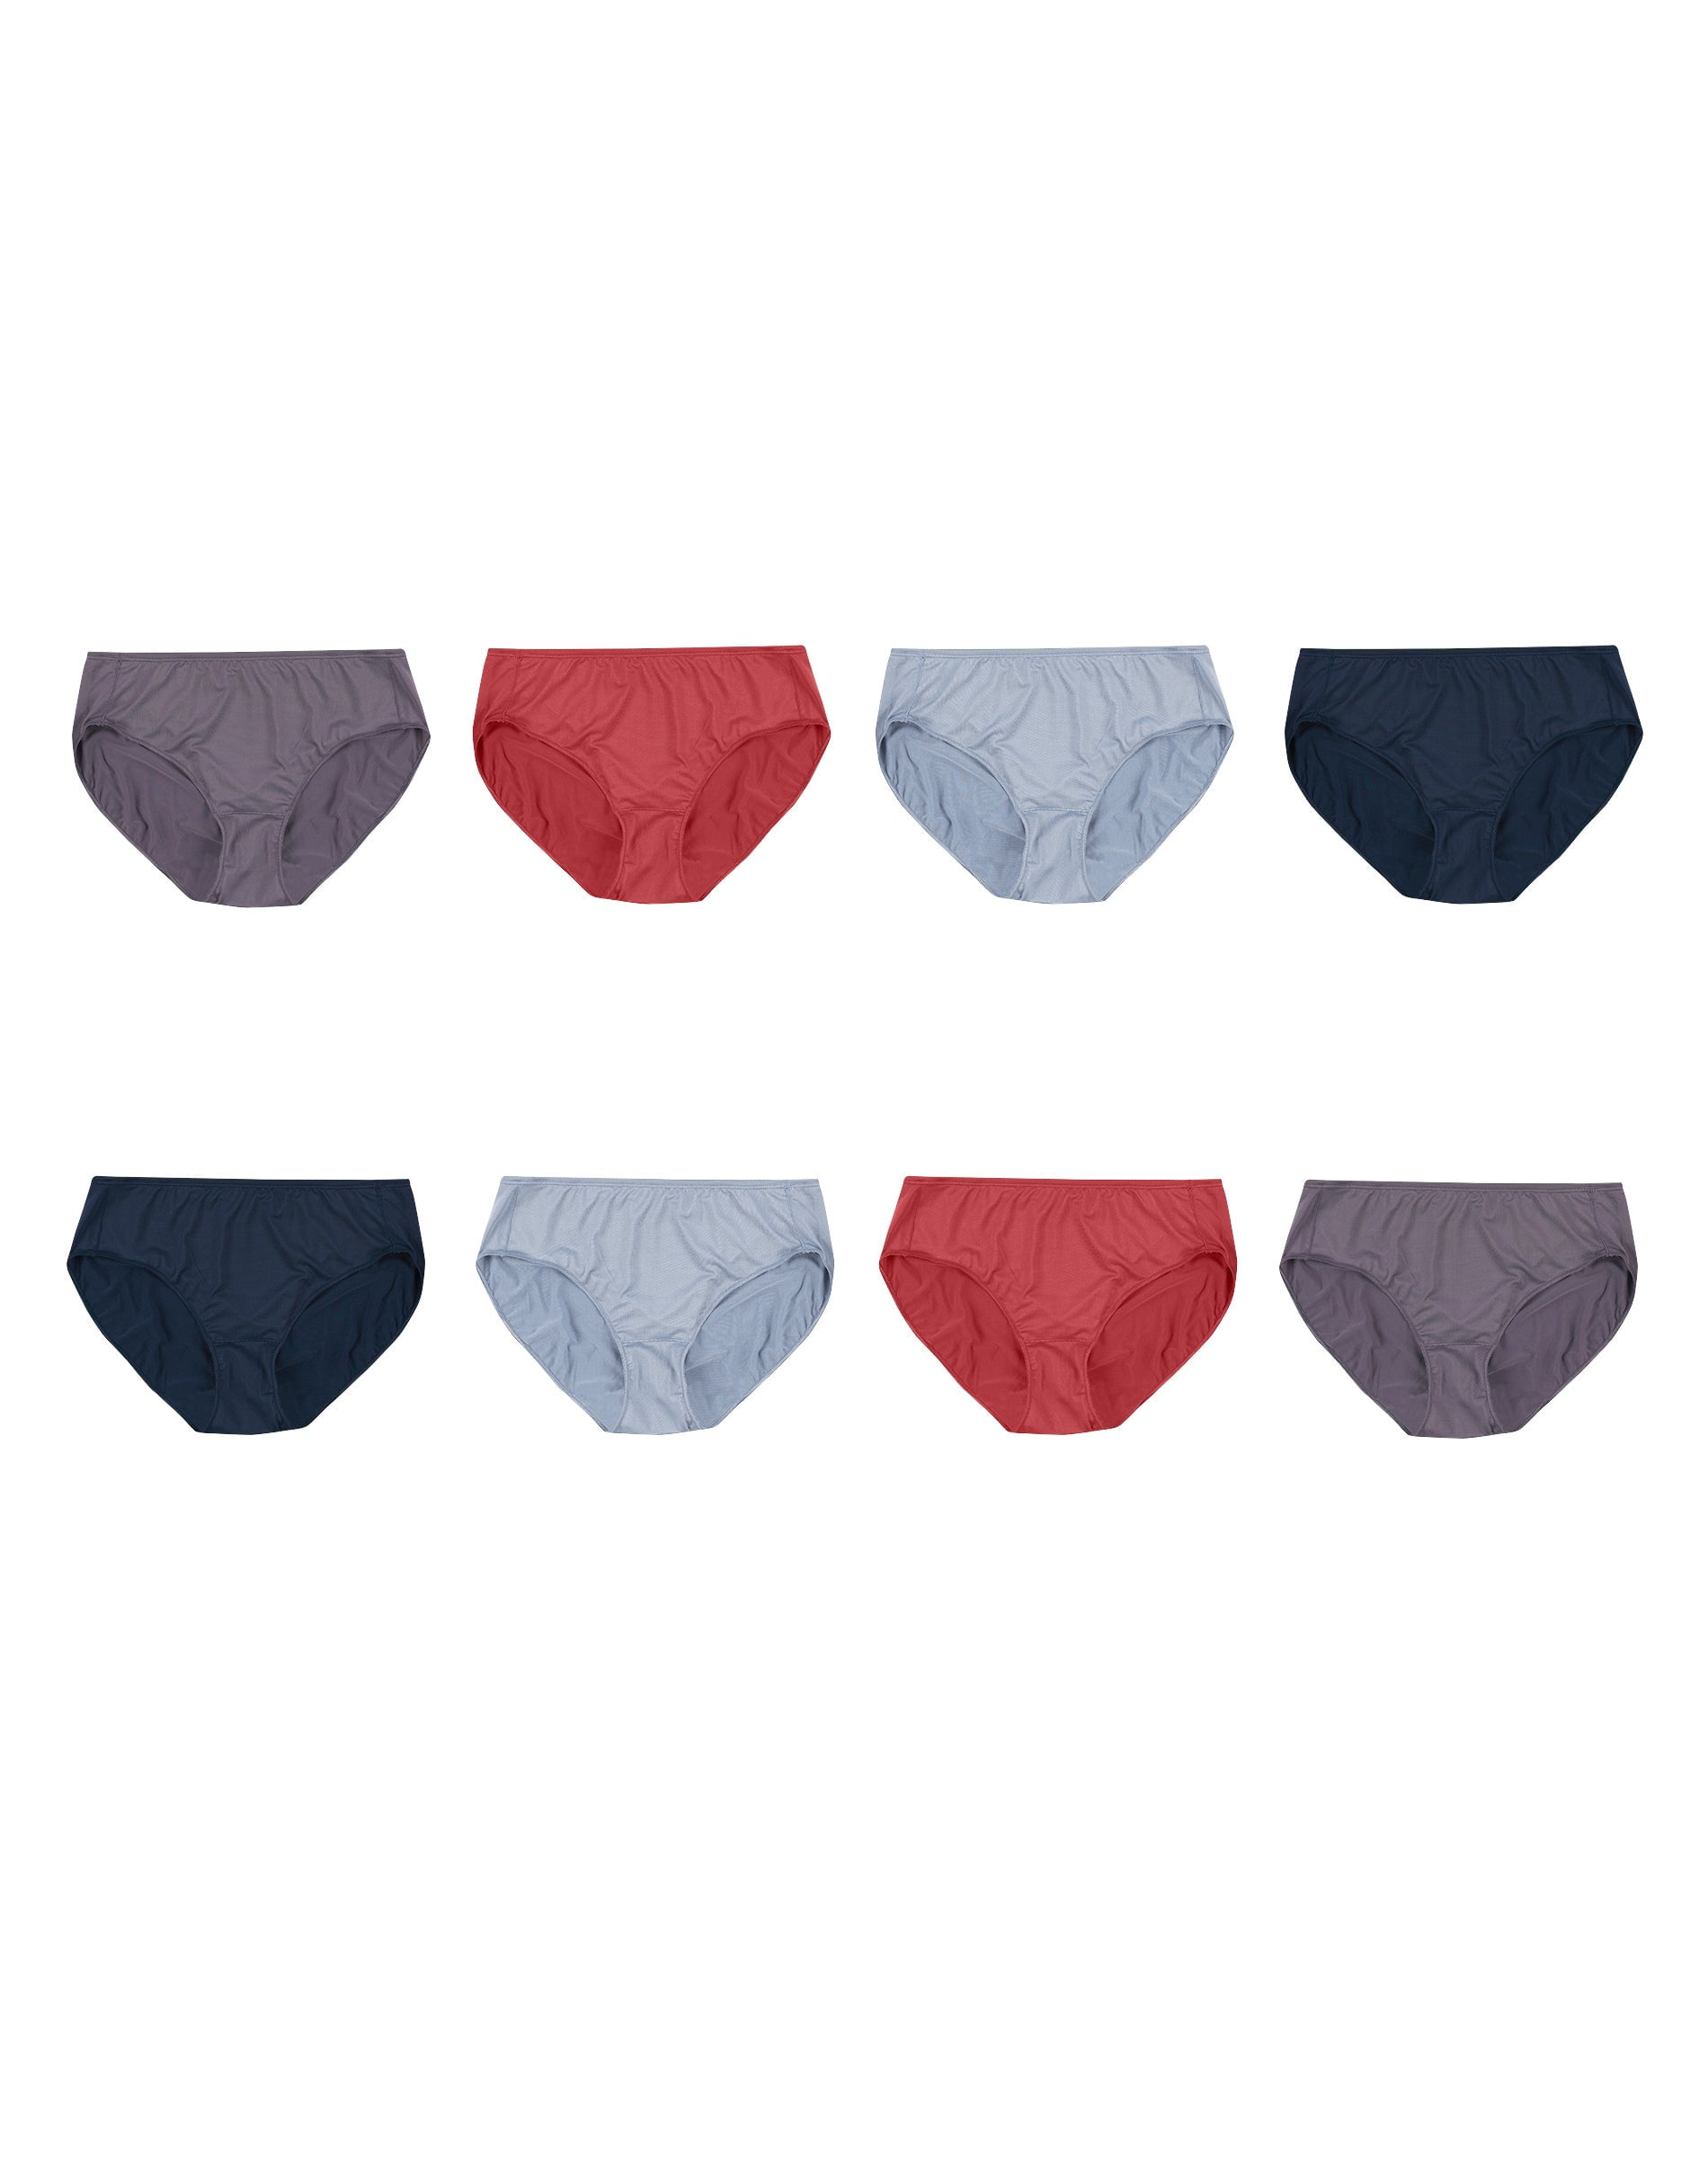 Hanes Breathable Mesh Women's Hipster Underwear, 10-Pack